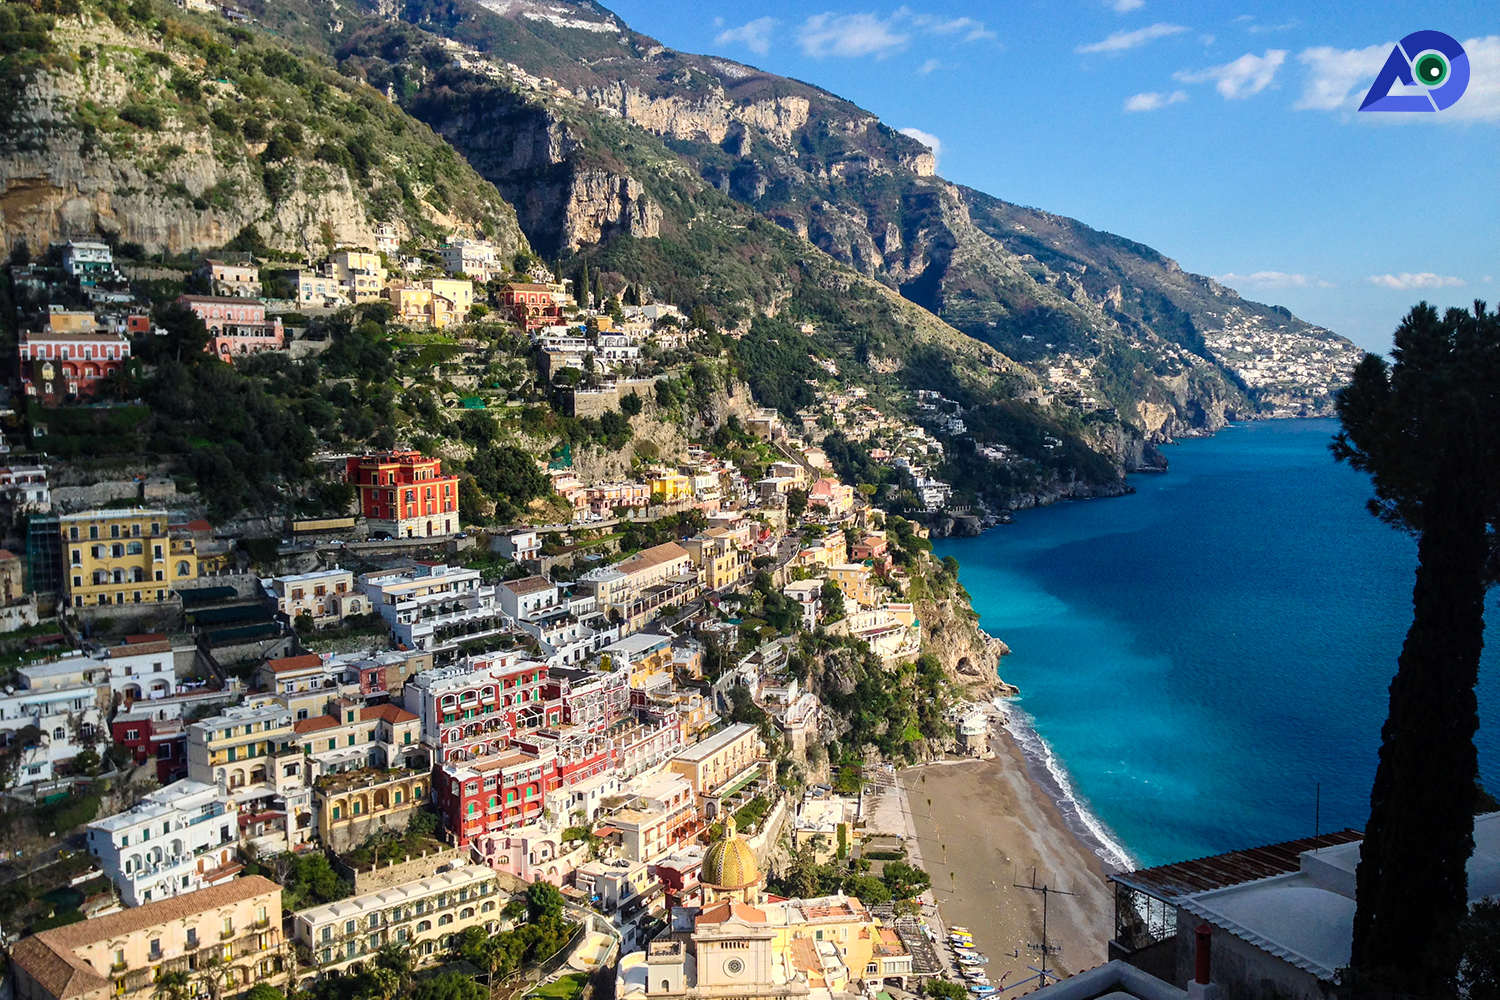 15 Beautiful Post Cards From Positano, Italy